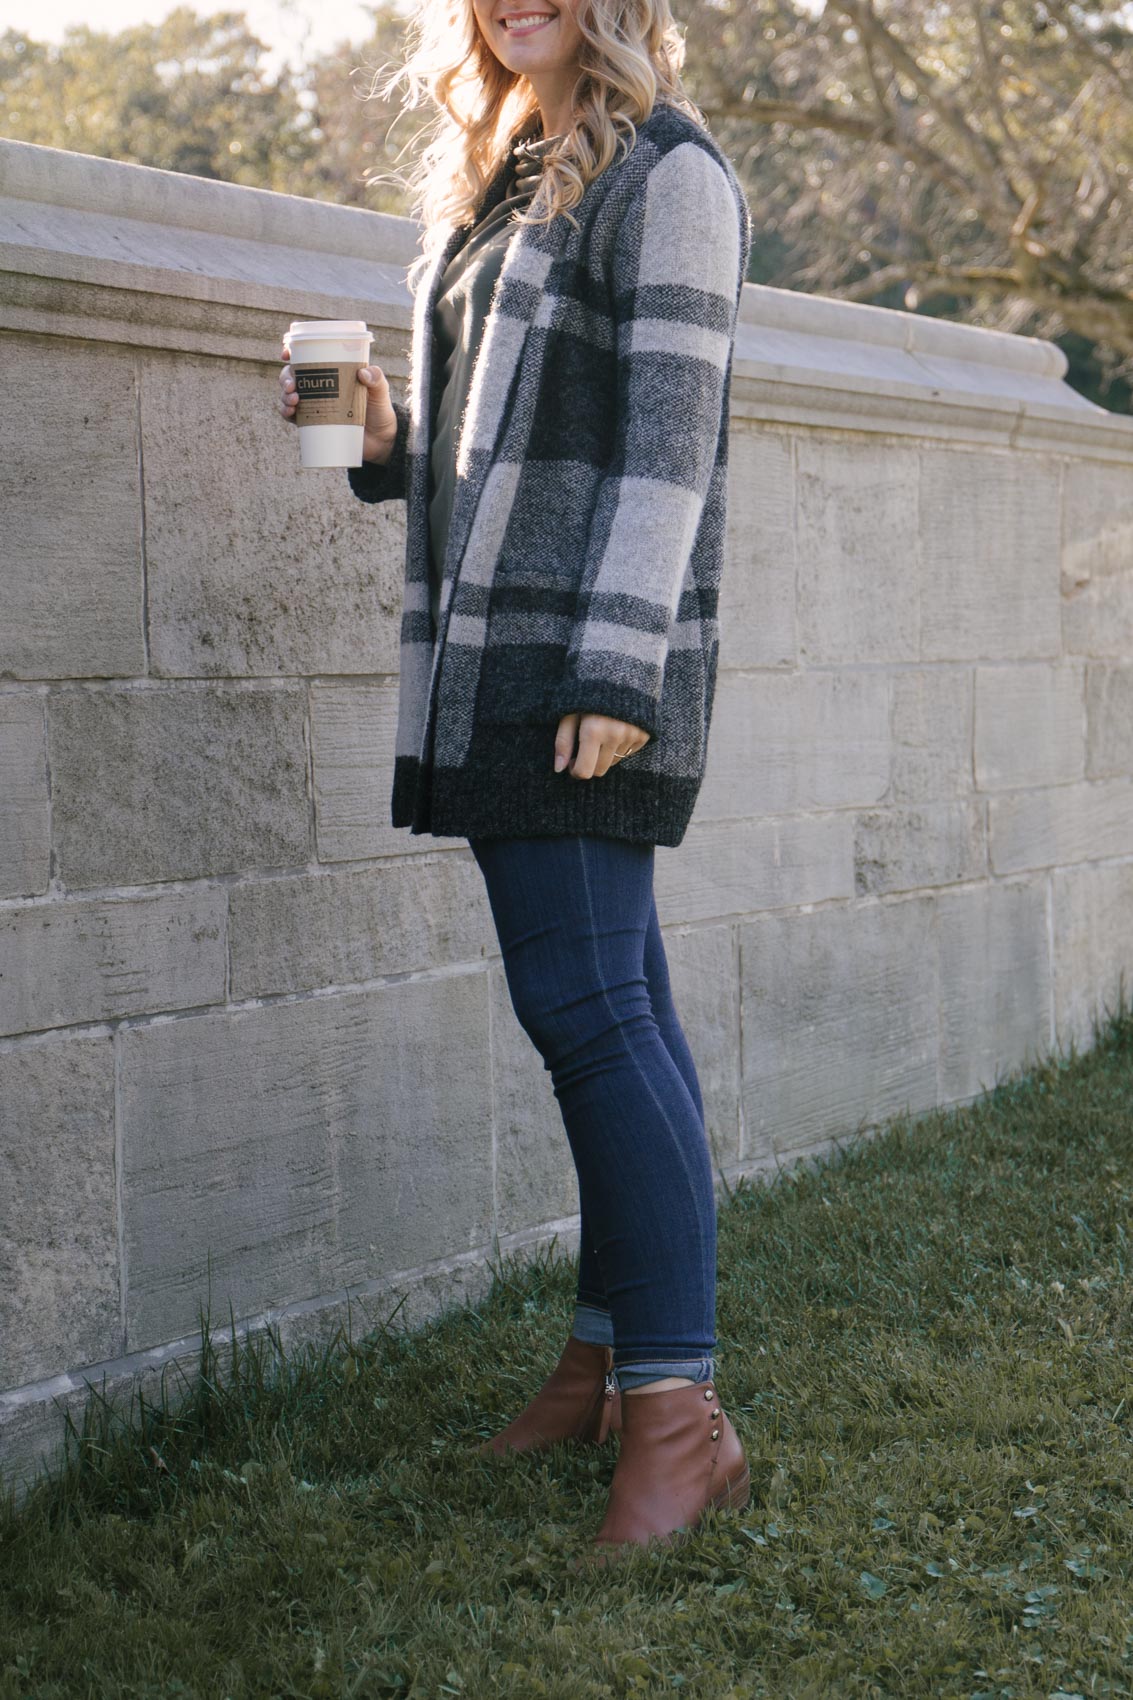 cute fall outfit styled by Allyn Lewis with the best fall ankle booties, stretchy skinny jeans, and a cozy long plaid cardigan